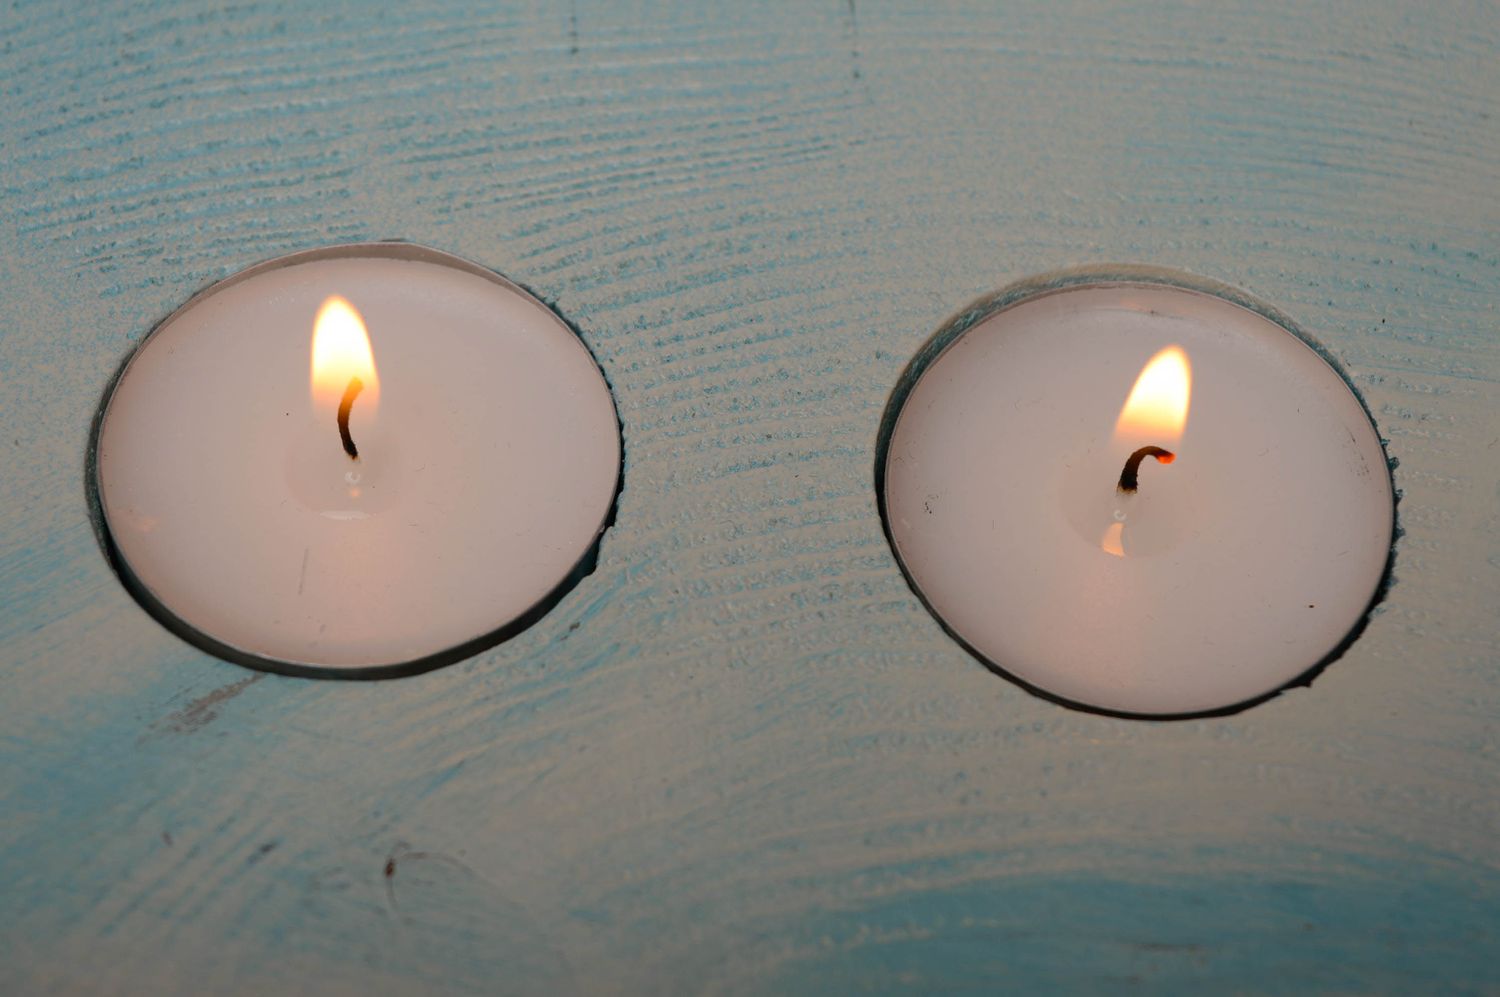 Handmade wooden candlestick for two candles photo 4